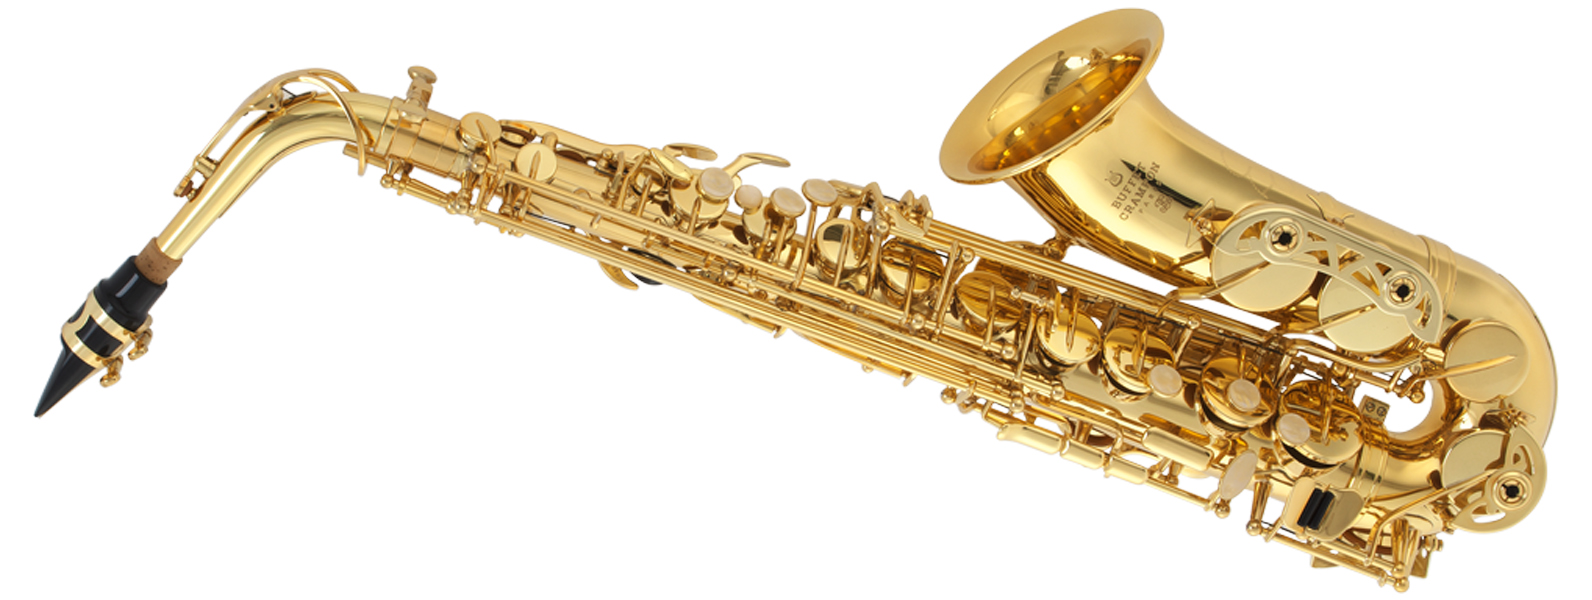 Learn About Instruments - Alto Saxophone